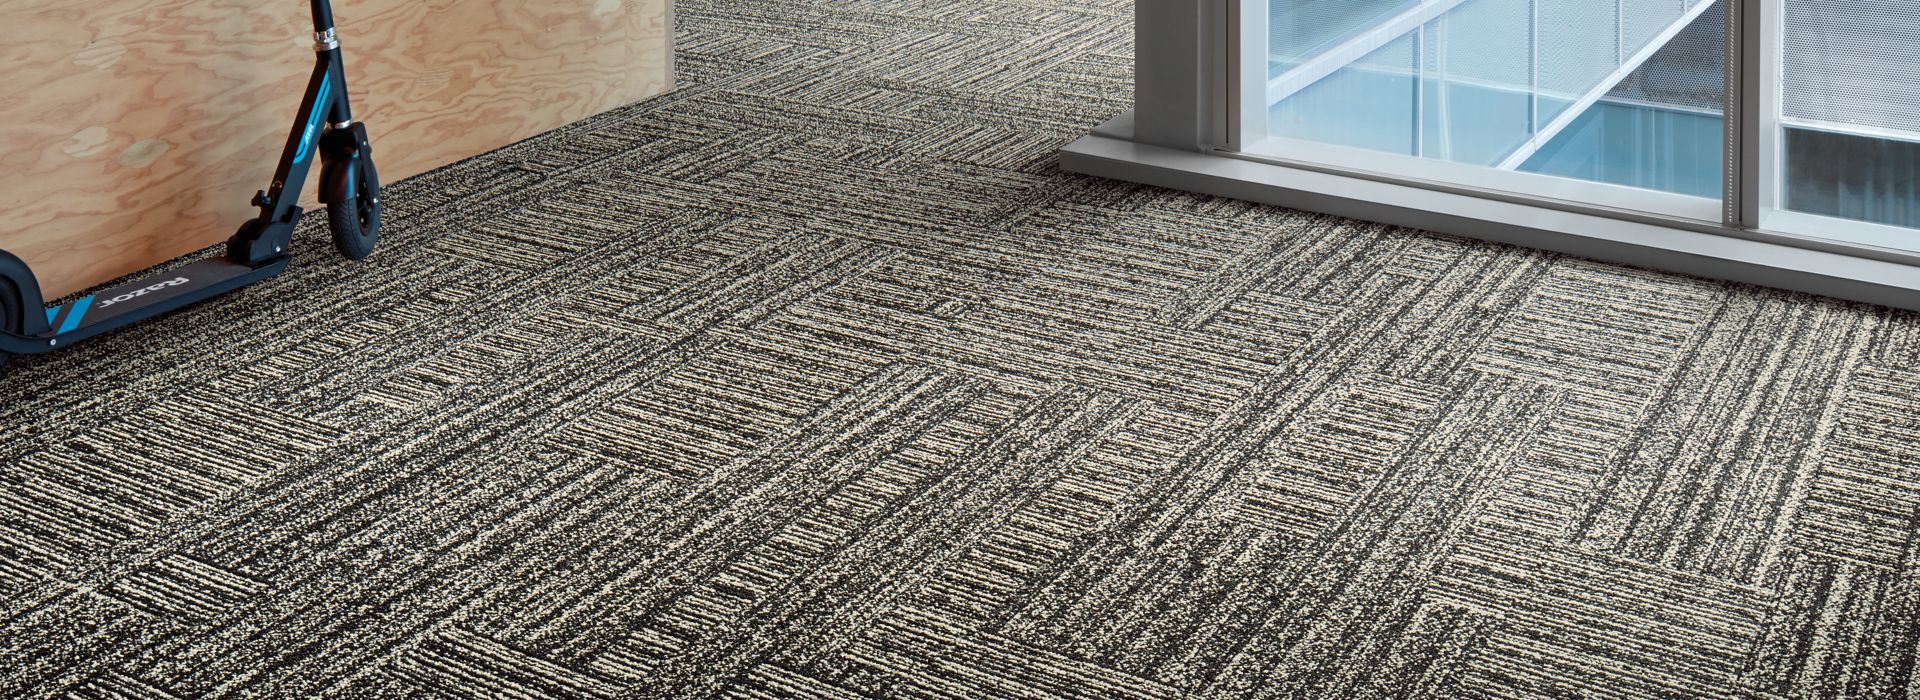 Interface Decibel and Hard Drive plank carpet tile in small area with glass windows